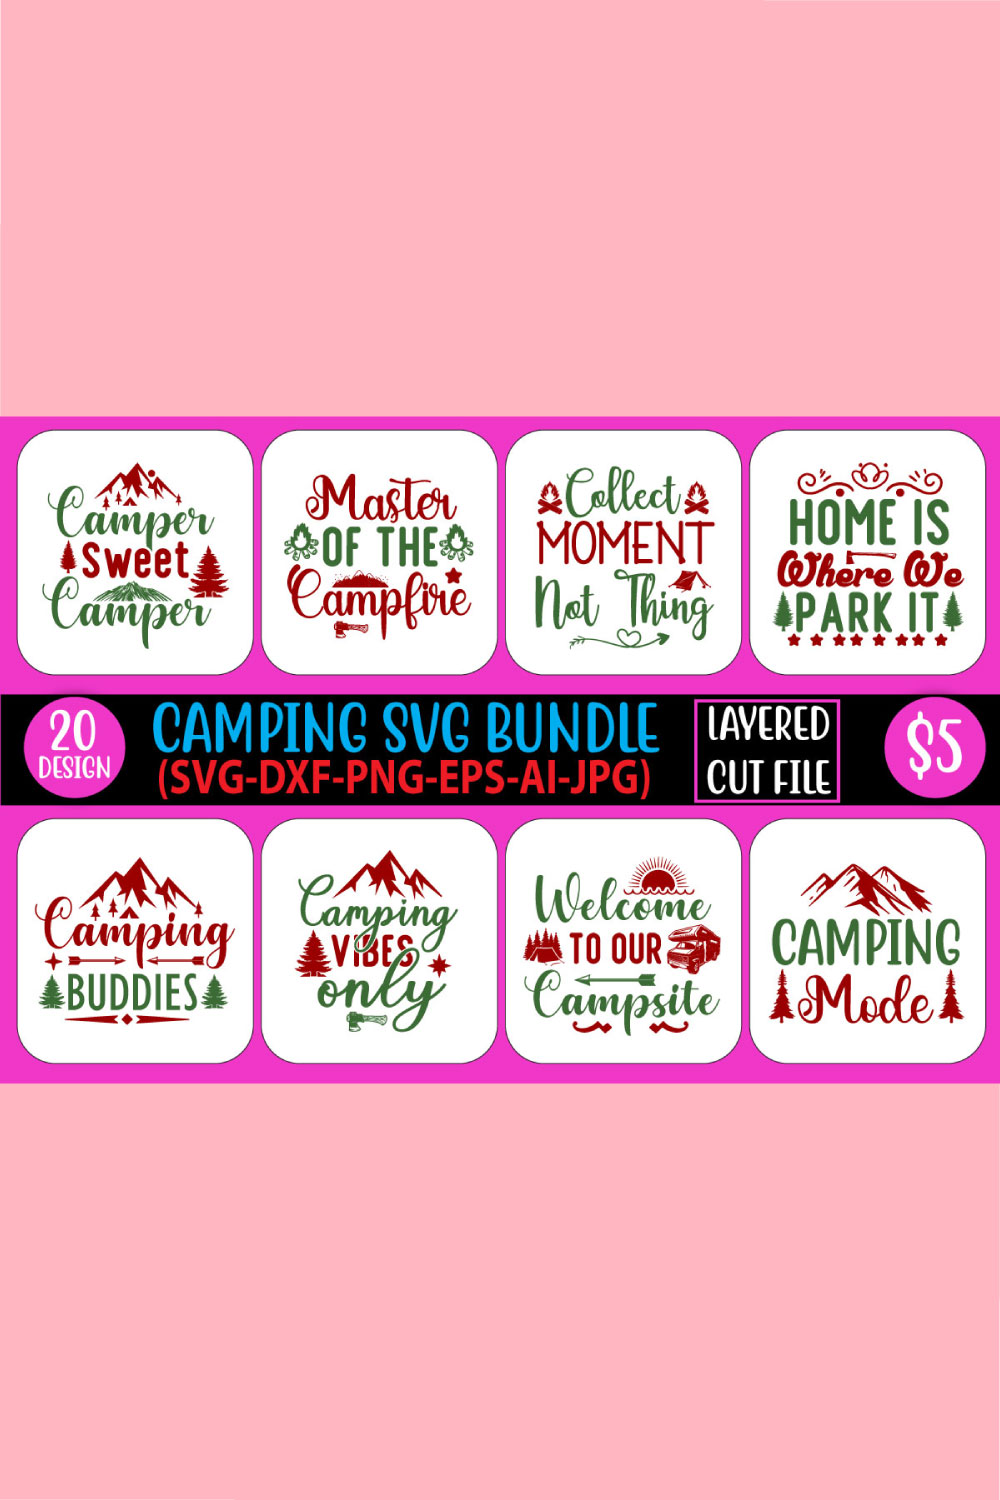 Bundle of irresistible images for prints on the theme of camping.